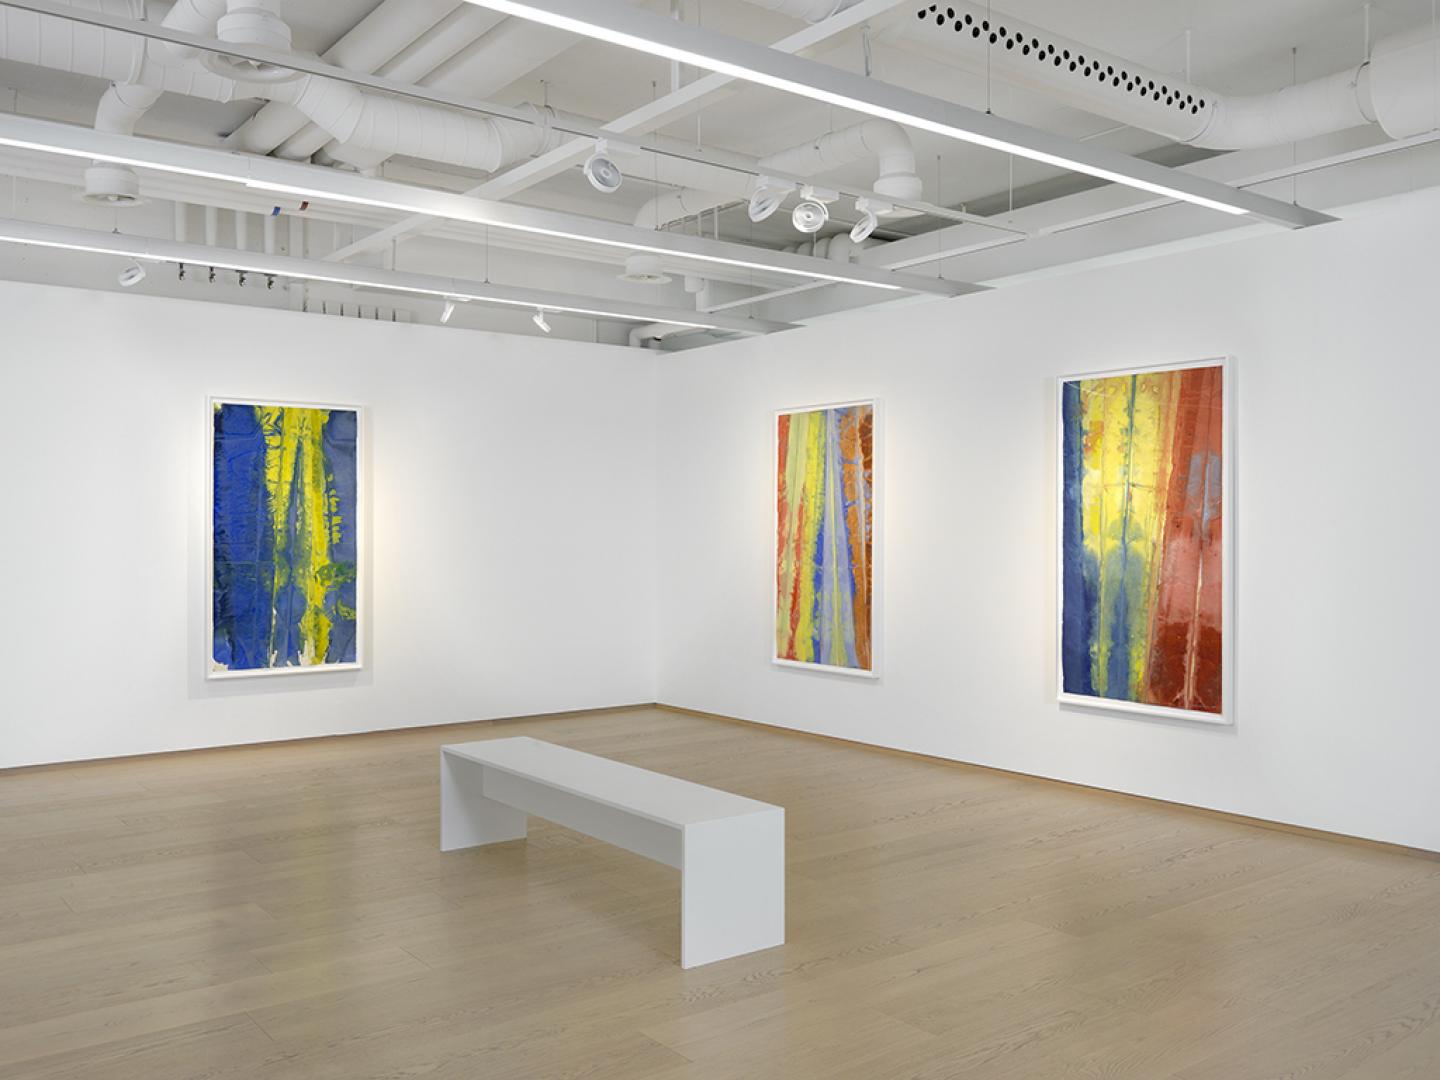 Installation view, Sam Gilliam: Watercolors, January 21 – March 19, 2021, Pace Gallery, Geneva © Sam Gilliam / 2020 Artists Rights Society Photo: Annik Wetter, courtesy Pace Gallery